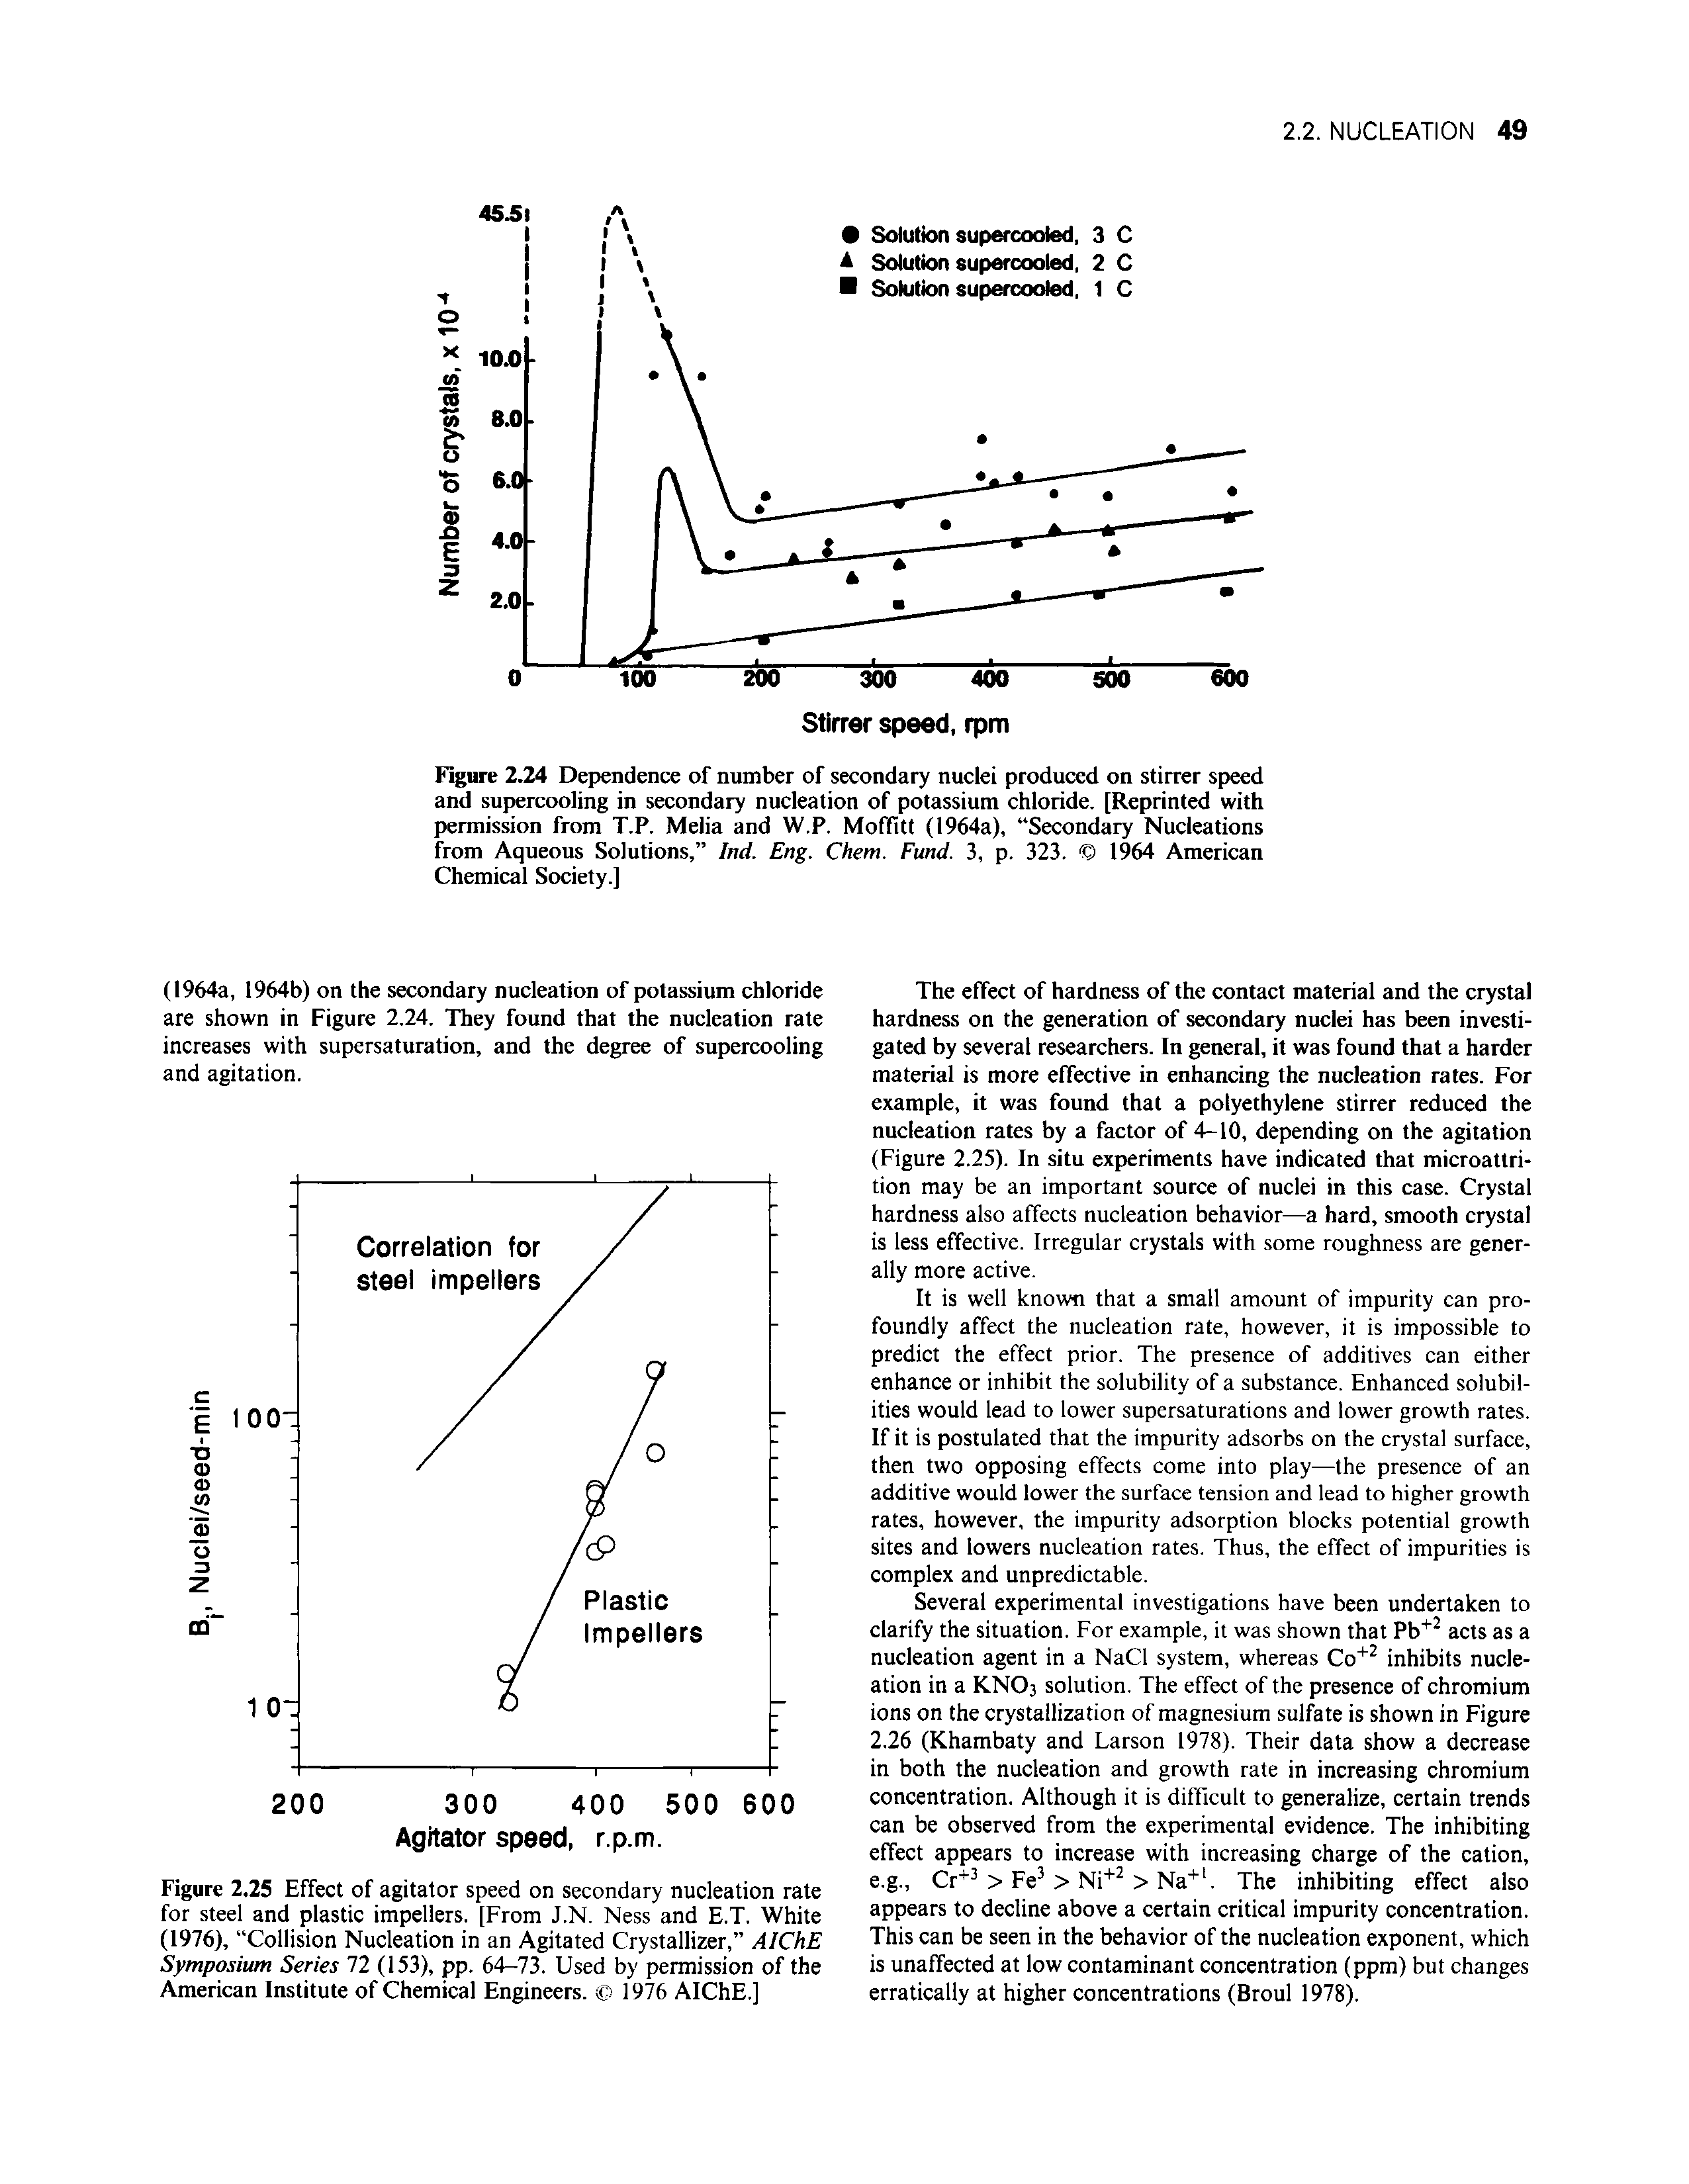 Figure 2.25 Effect of agitator speed on secondary nucleation rate for steel and plastic impellers. [From J.N. Ness and E.T. White (1976), Collision Nucleation in an Agitated Crystallizer, AIChE Symposium Series 72 (153), pp. 64-73. Used by permission of the American Institute of Chemical Engineers. 1976 AIChE.]...